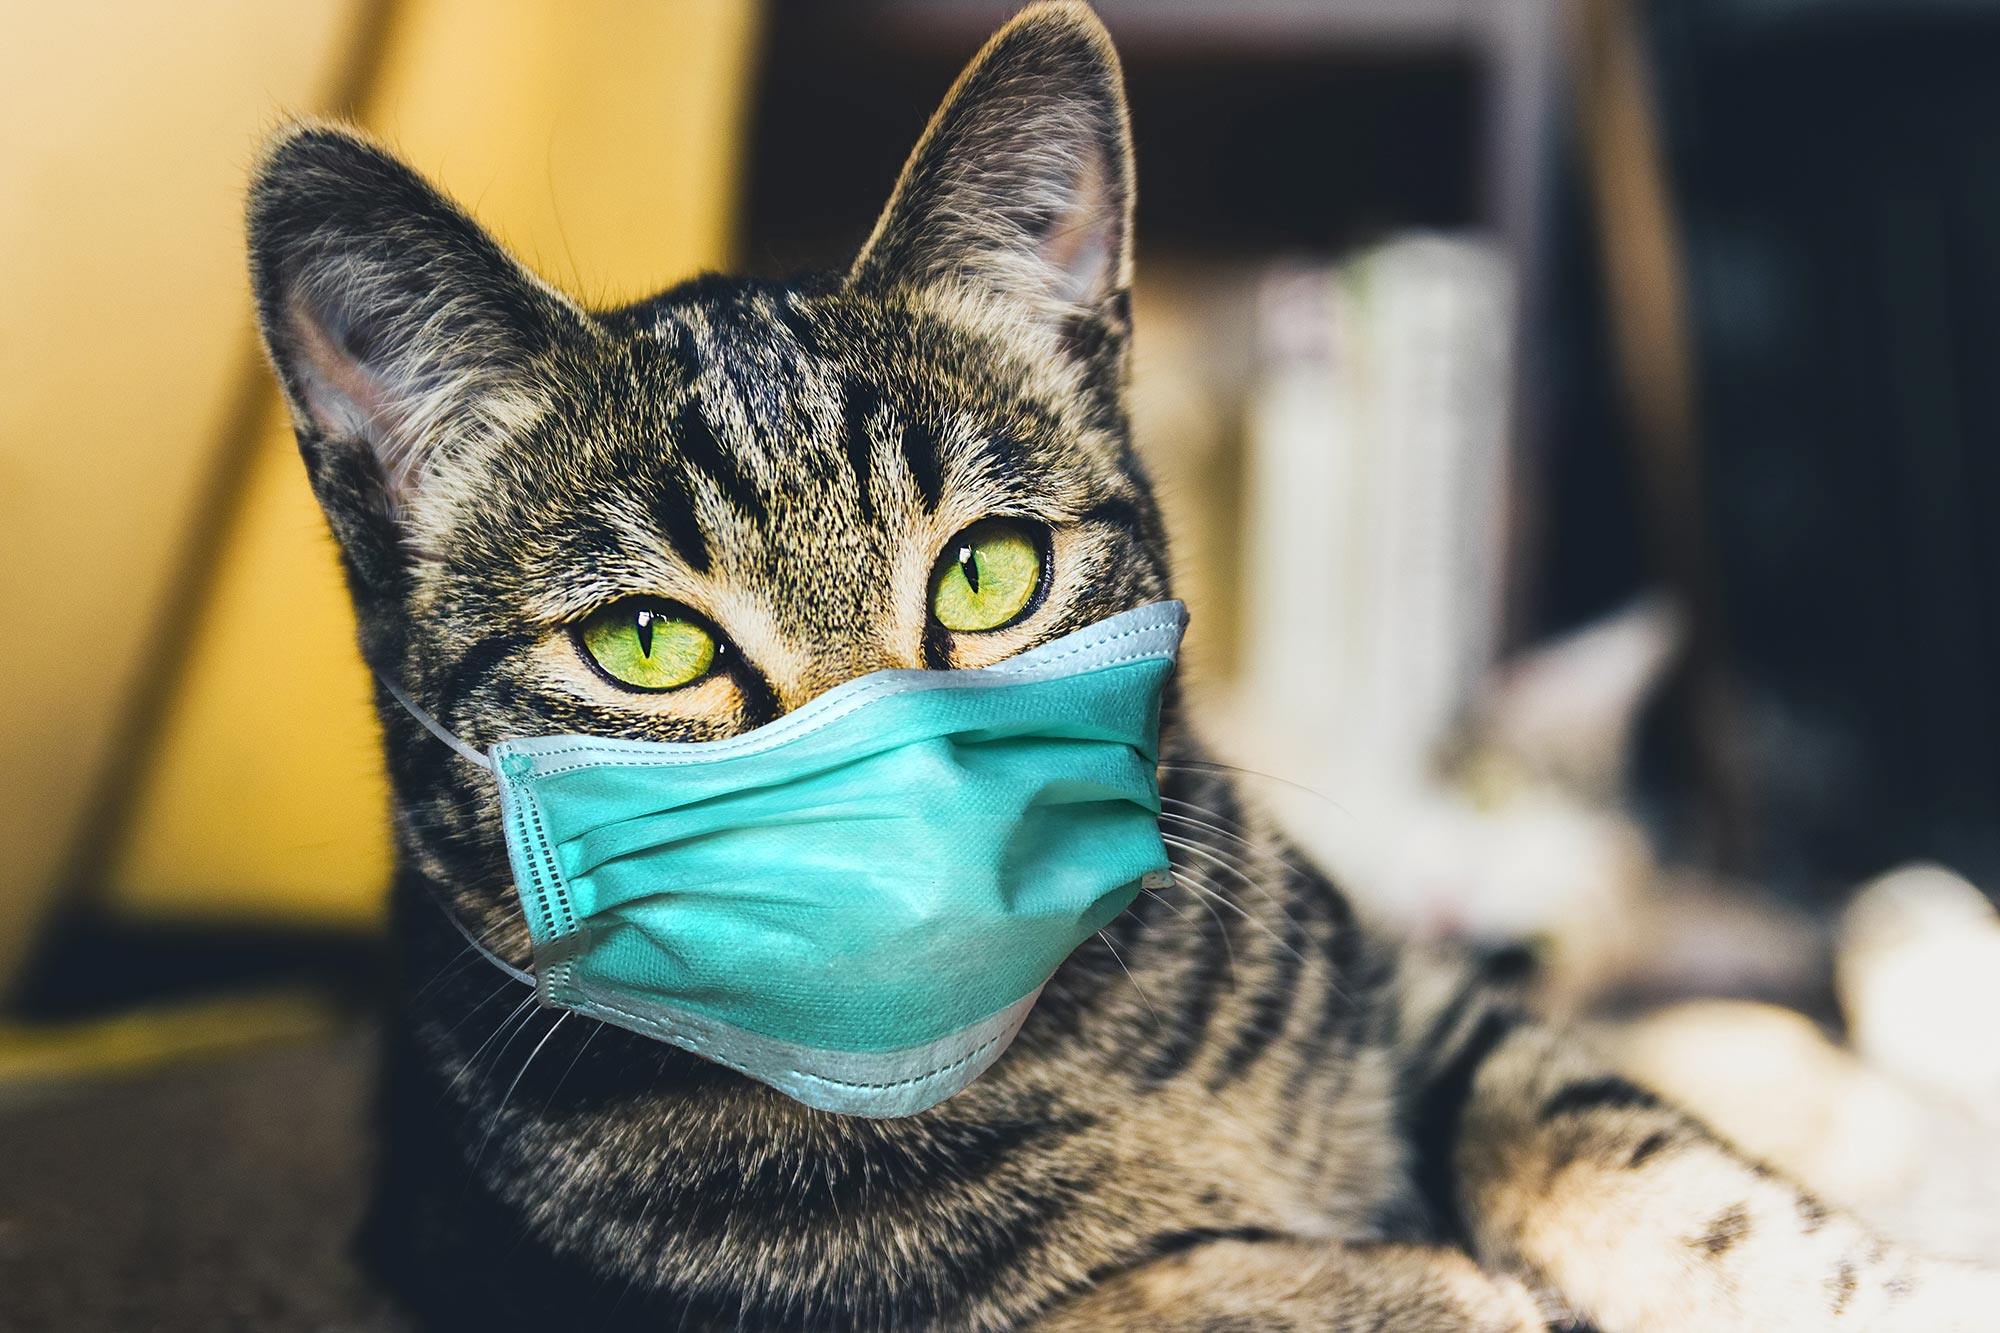 Cats Can Spread COVID19 Coronavirus Infection to Other Cats